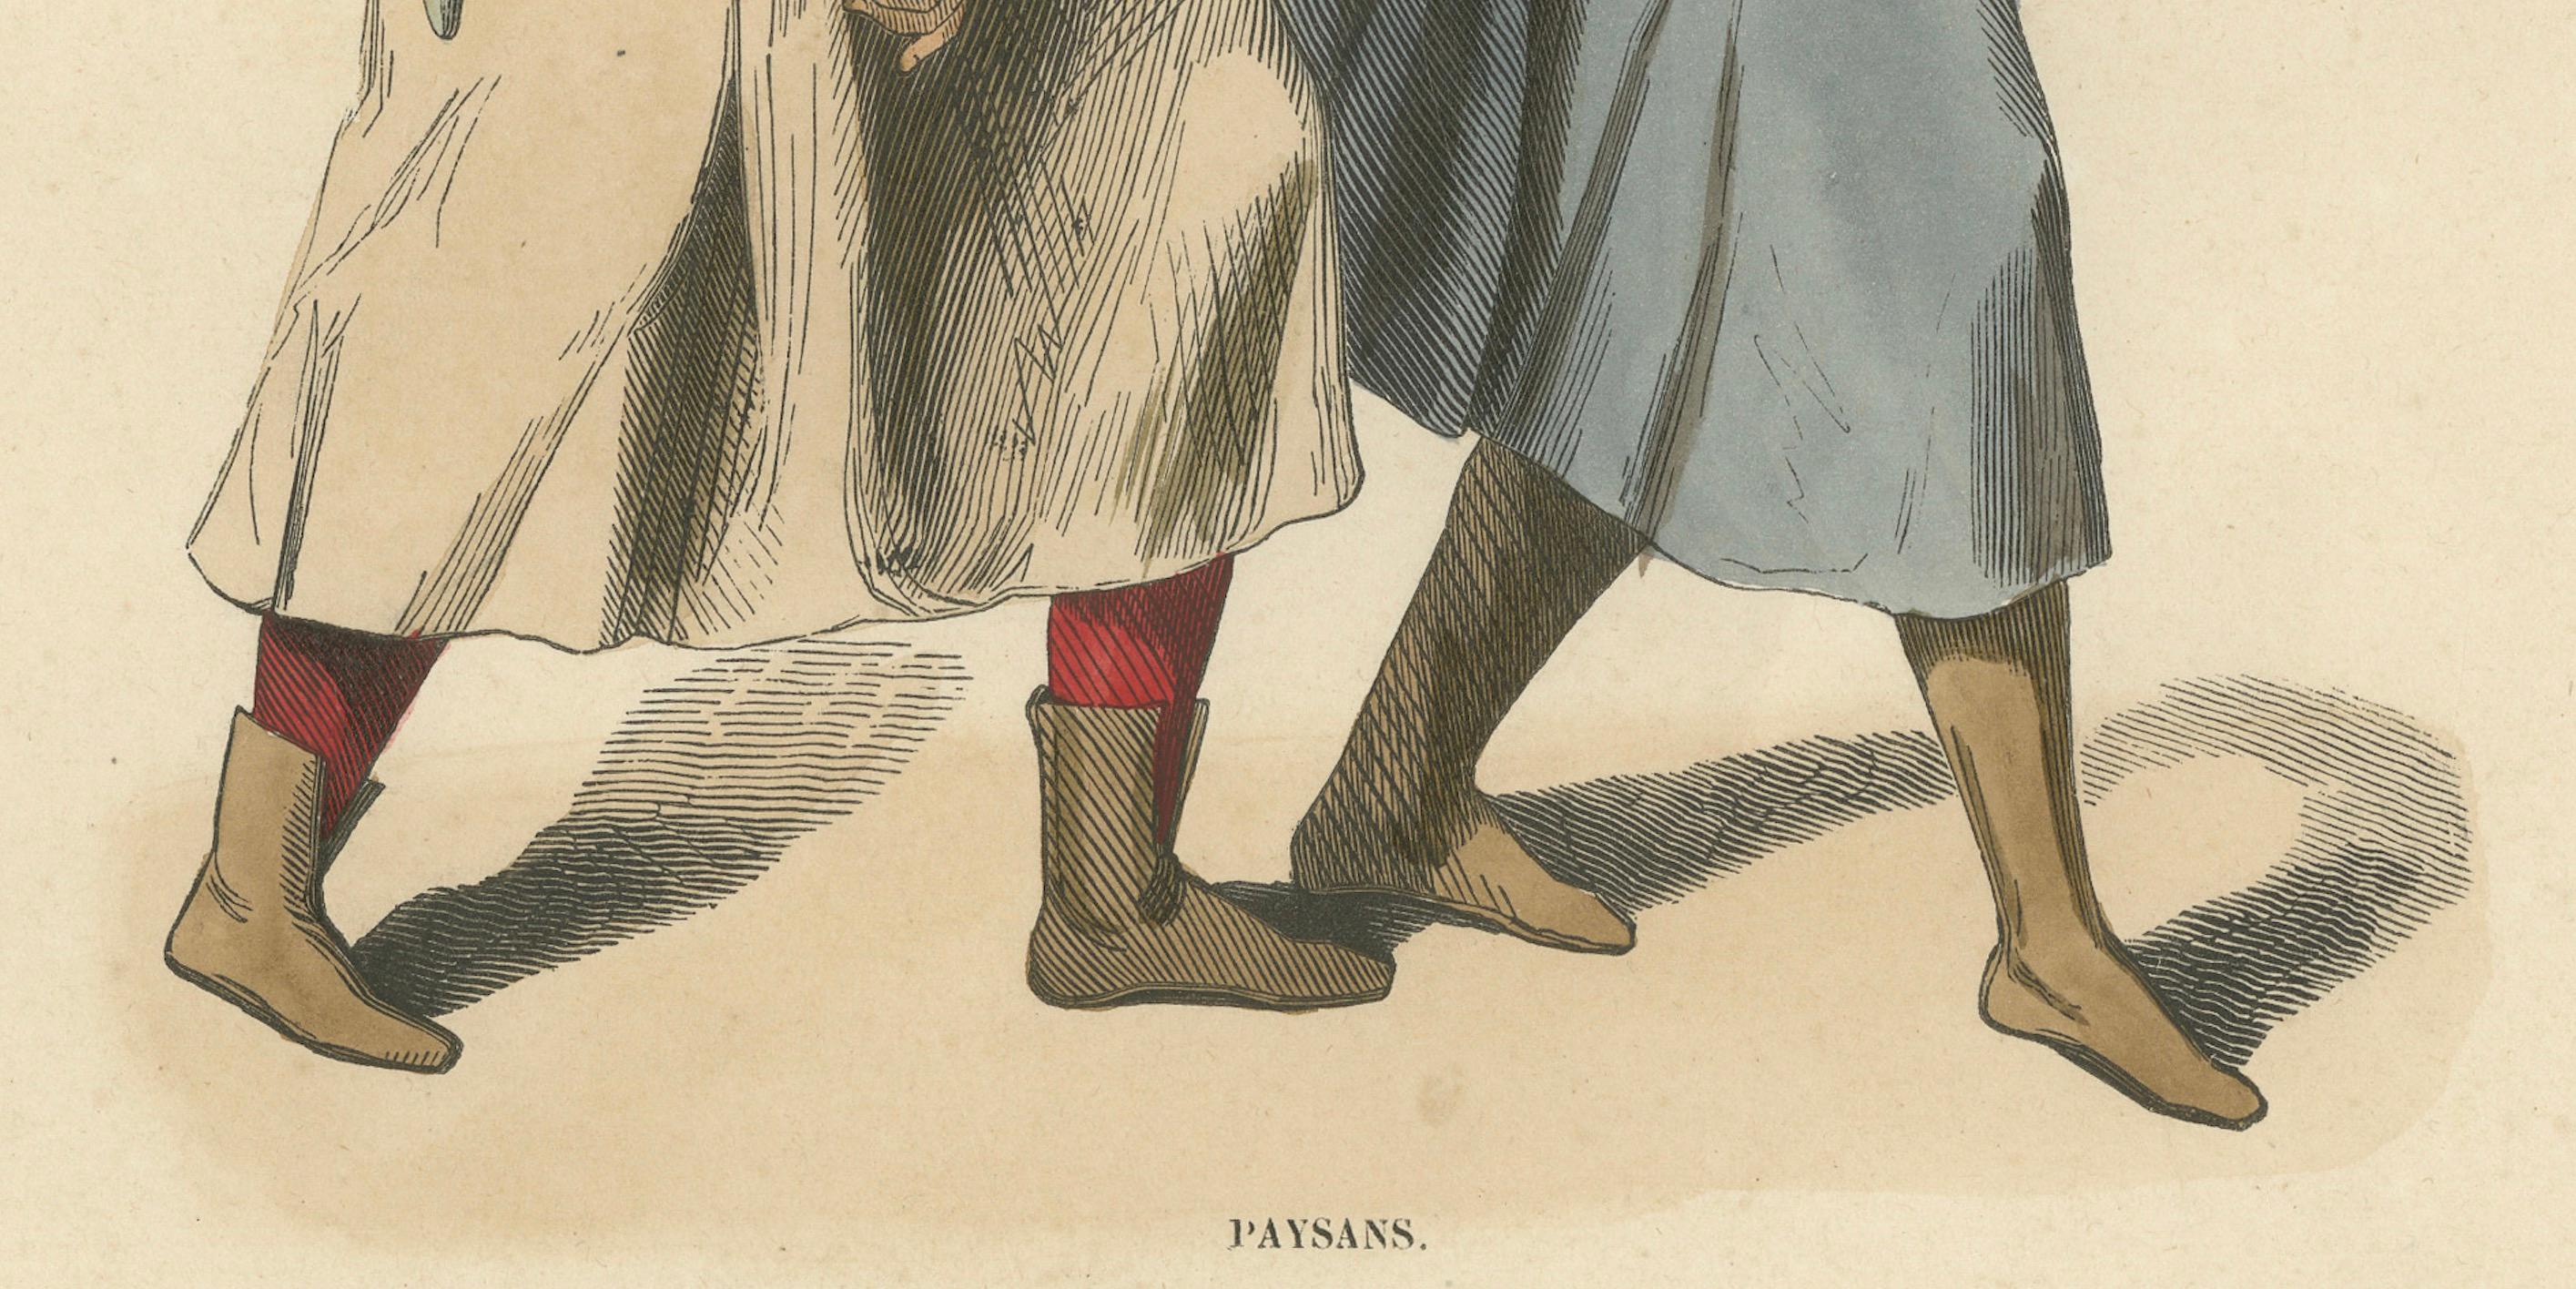 The image depicts two medieval peasants, as indicated by the caption 